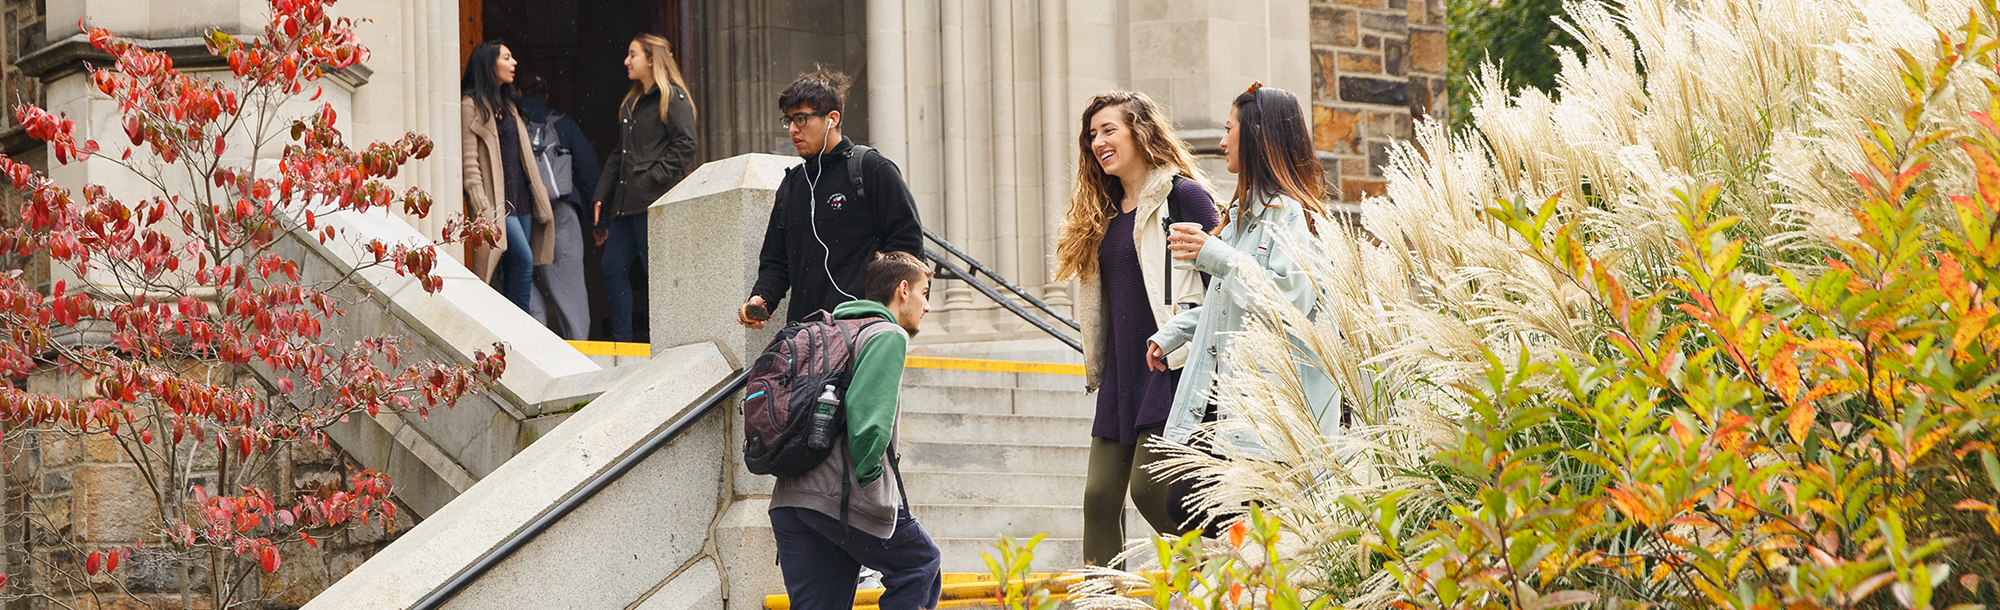 Students passing each other on the library steps with fall foliage in the foreground